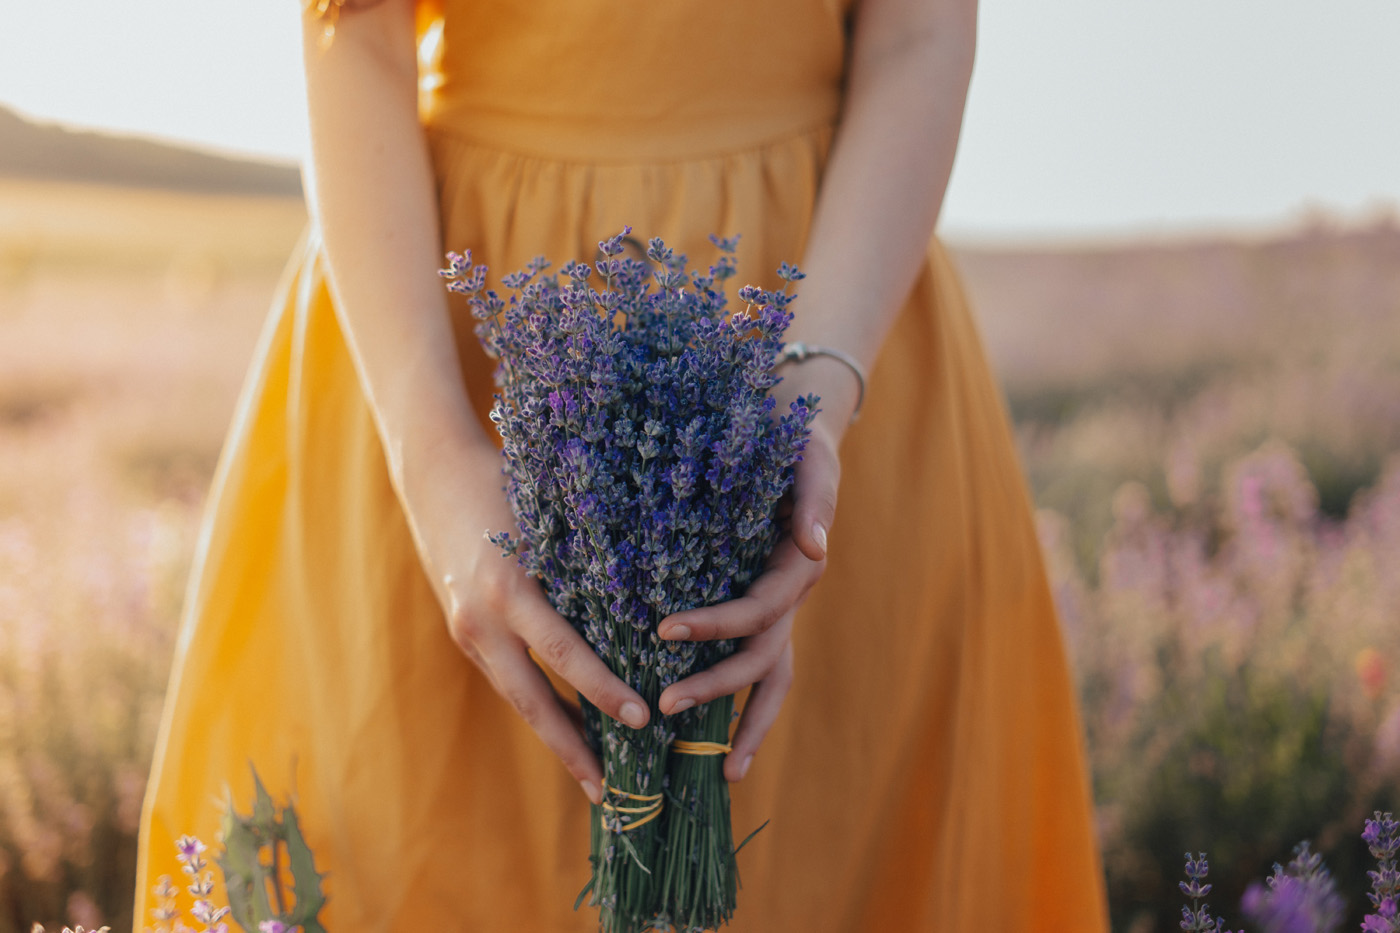 person in yellow dress holding purple lavender bunch